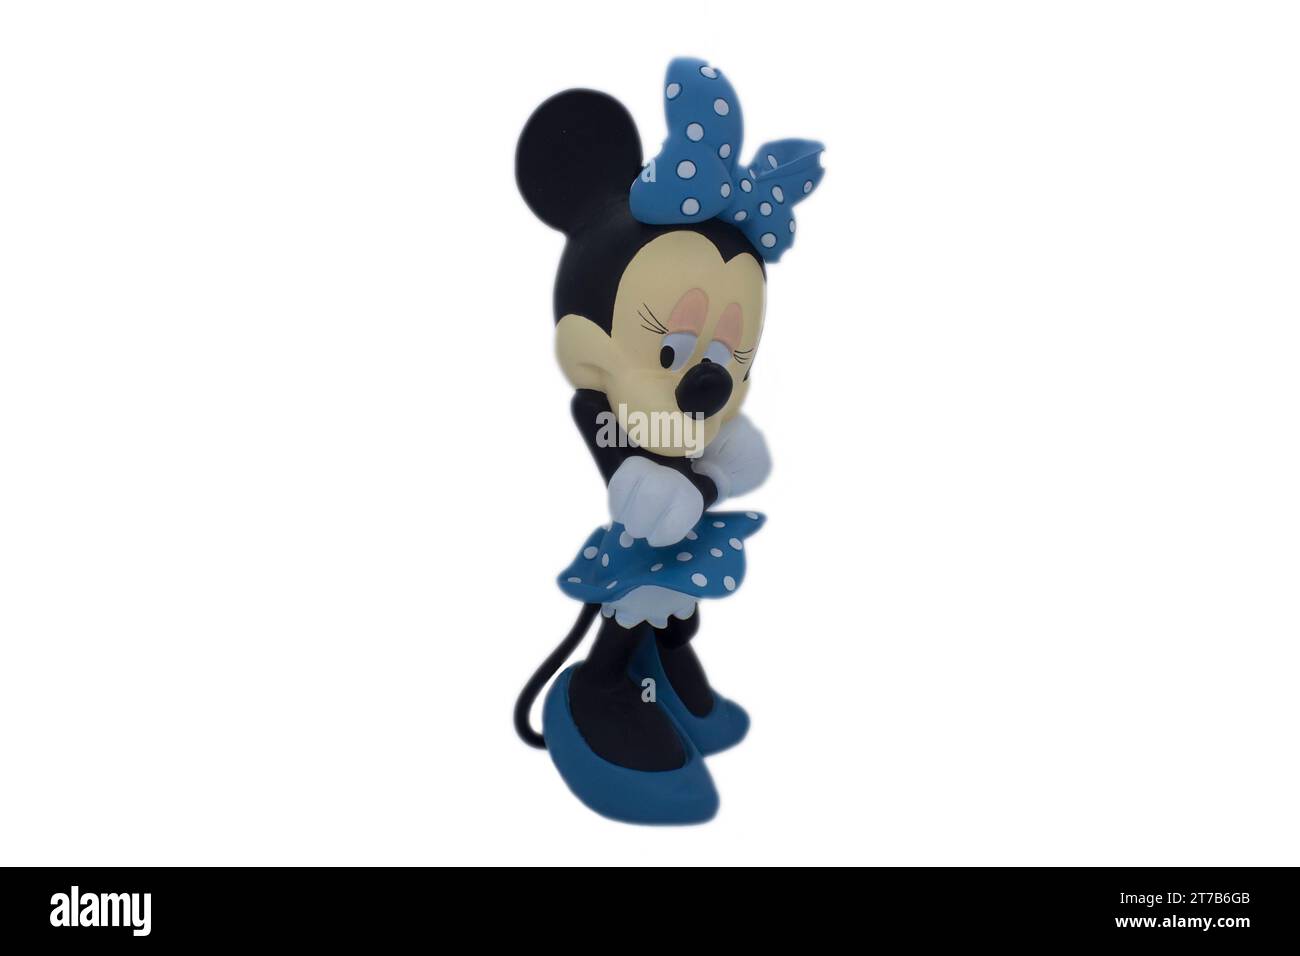 Minnie Mouse on a white isolated background. Stock Photo